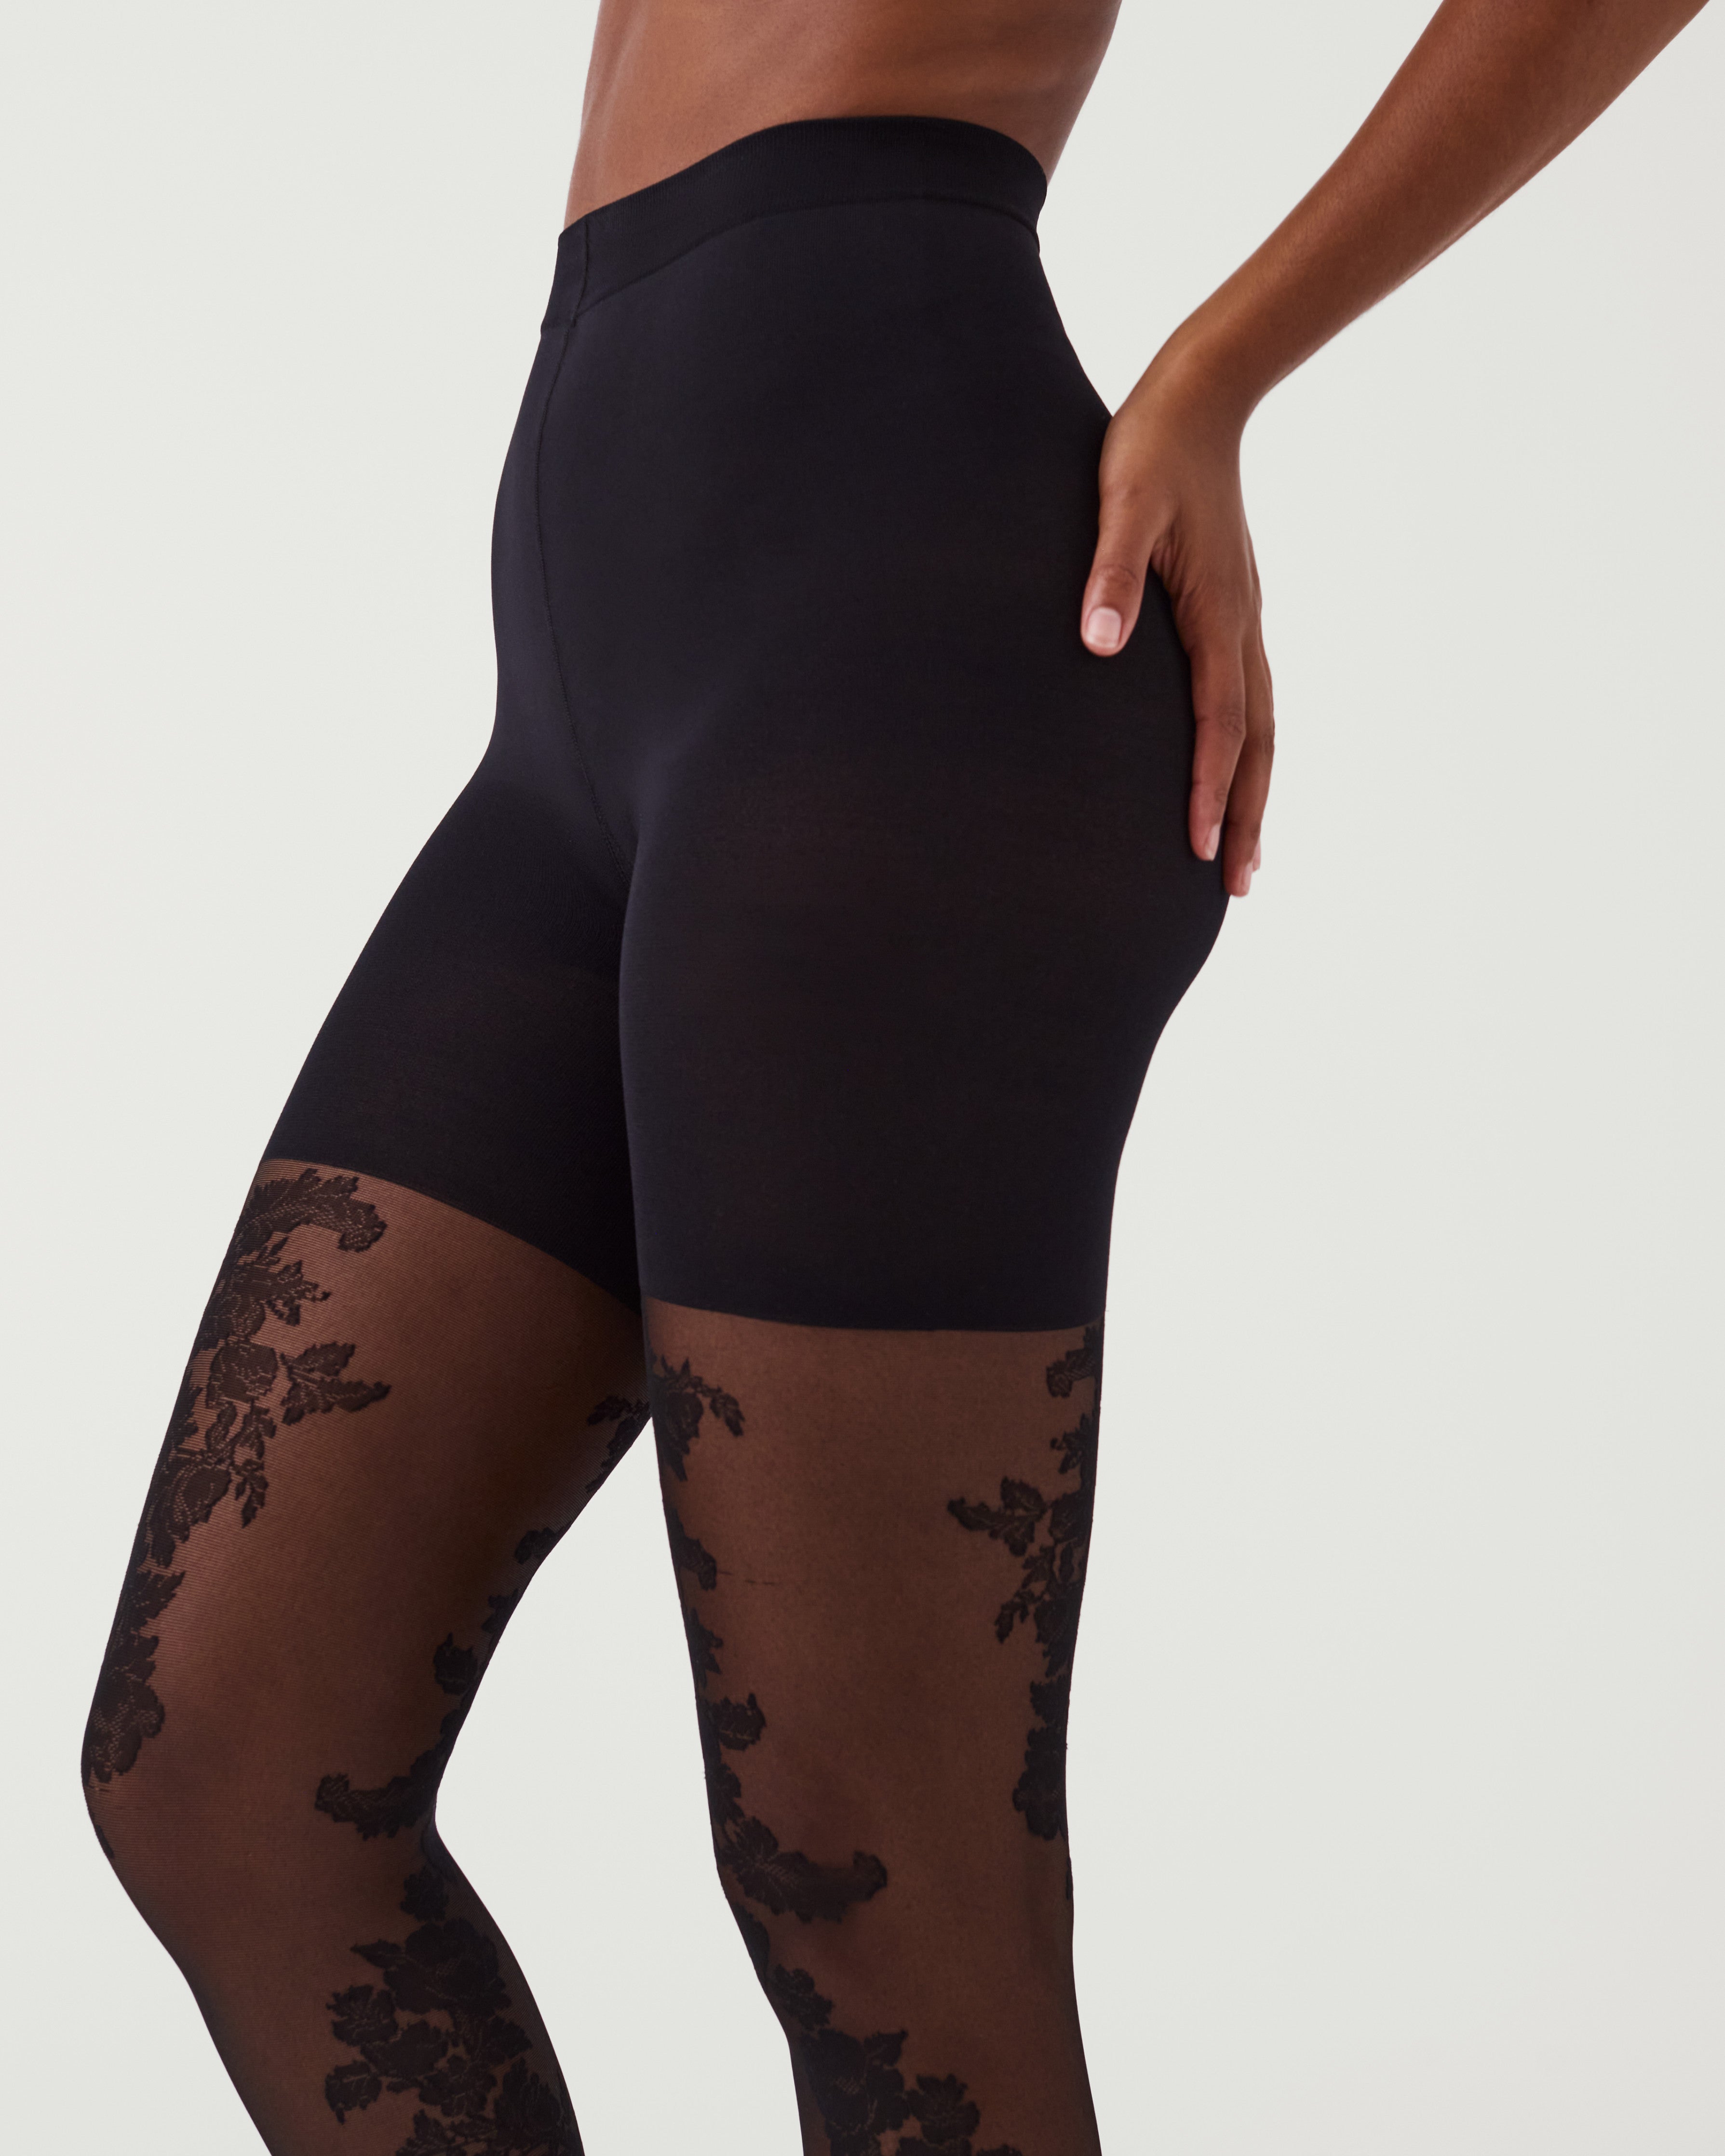 NWT $42 SPANX Size D FISHNET FLORAL MID-THIGH SHAPING TIGHTS Very Black  20180R